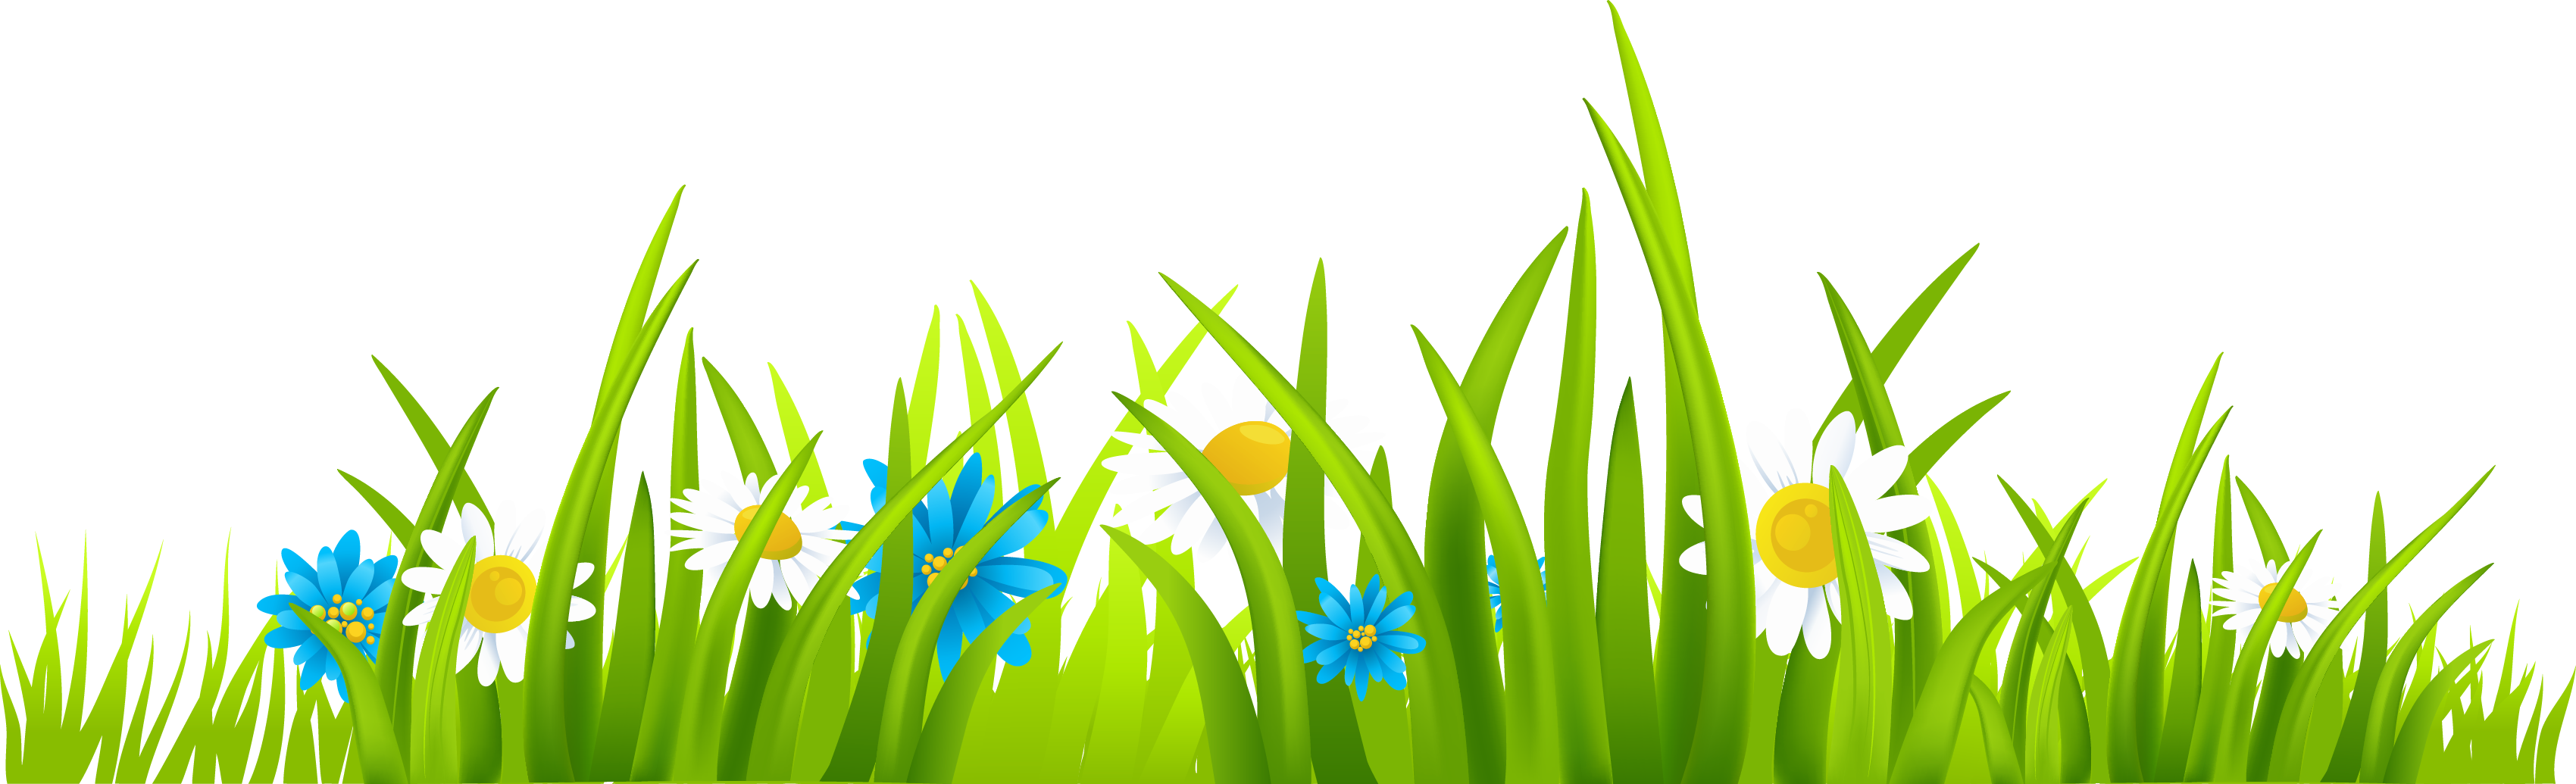 grass skirt pictures clip art free - photo #44